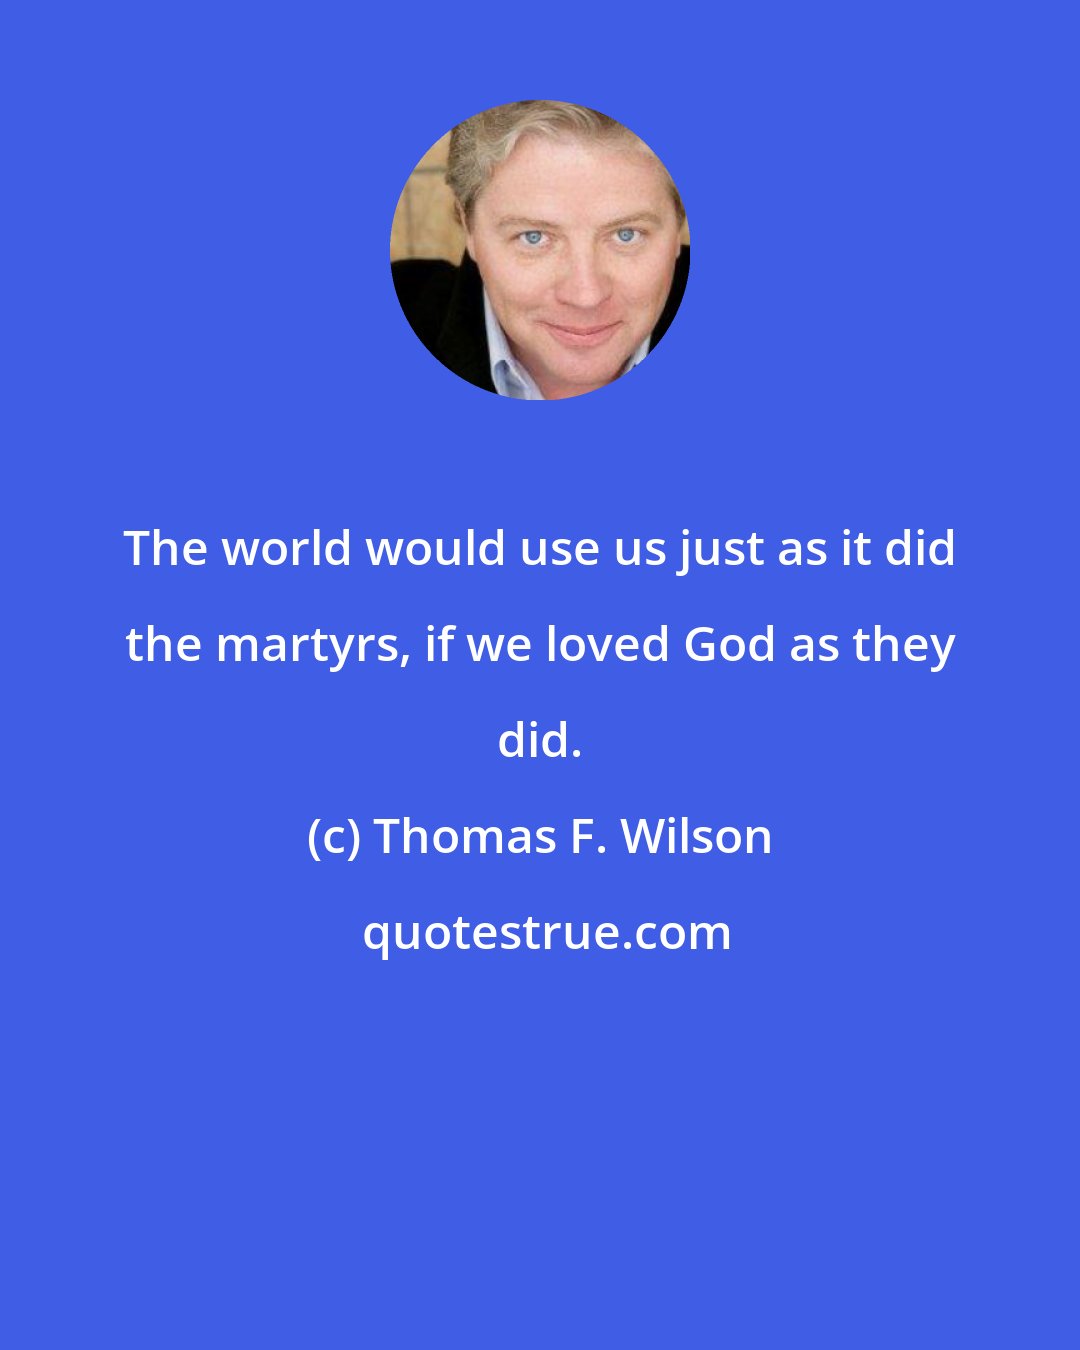 Thomas F. Wilson: The world would use us just as it did the martyrs, if we loved God as they did.